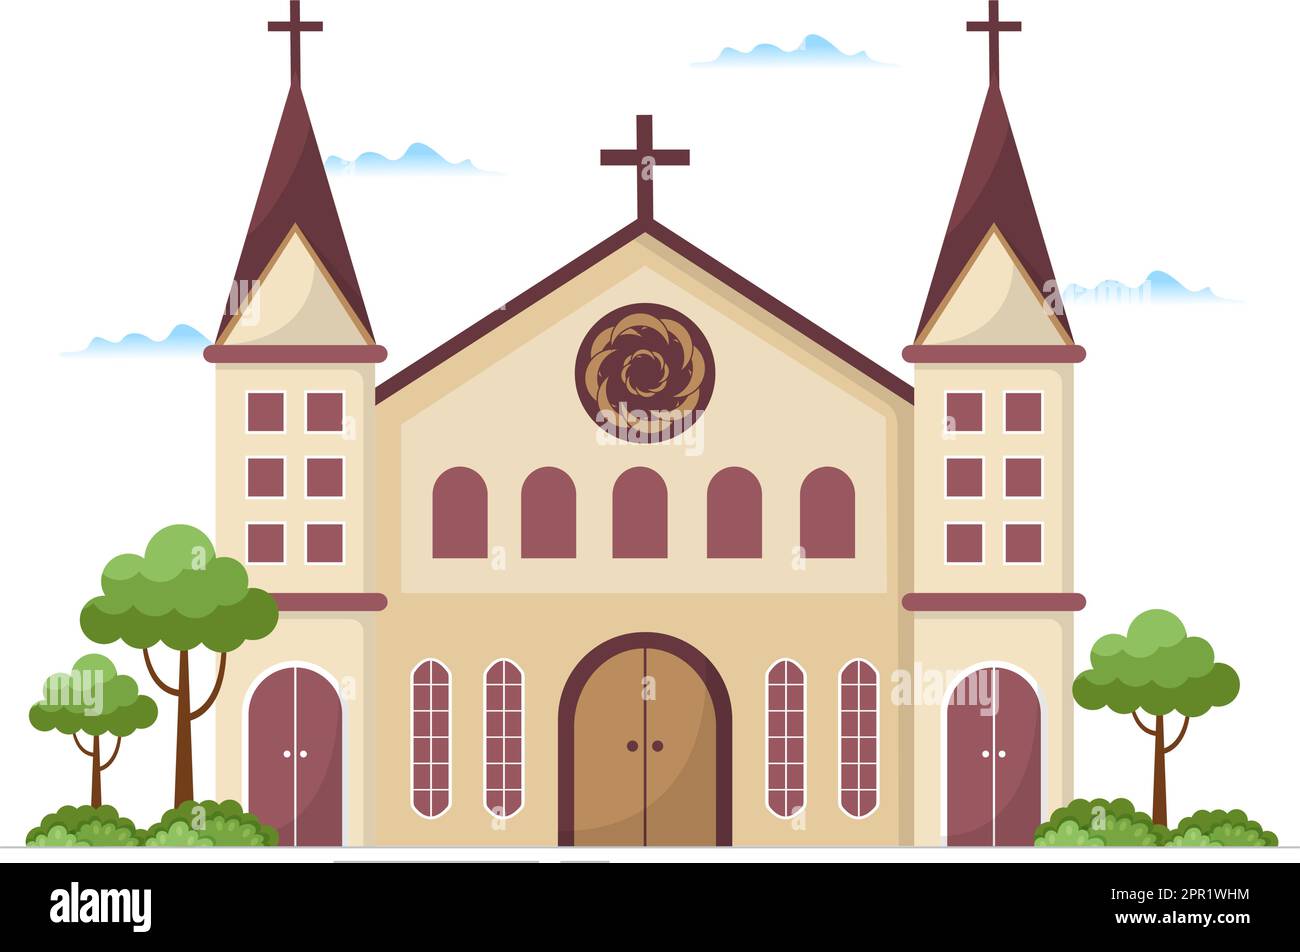 Lutheran Church with Cathedral Temple Building and Christian Religion Place Architecture in Flat Cartoon Hand Drawn Template Illustration Stock Vector